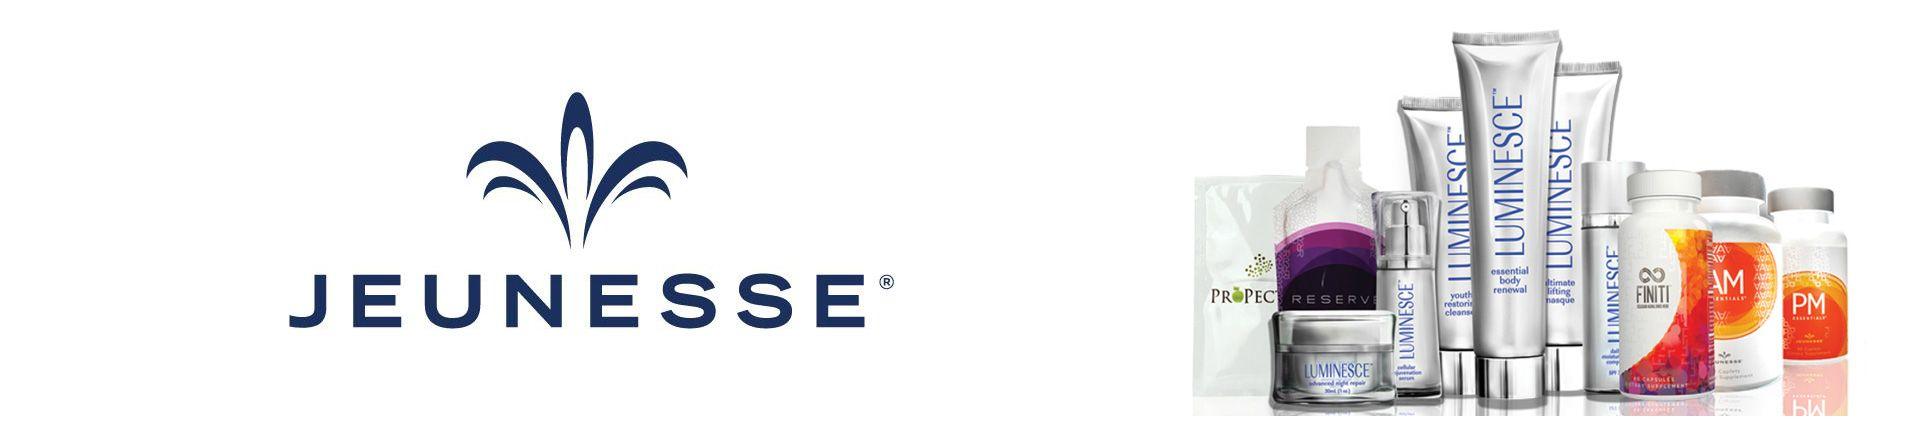 Personal Care Product Logo - Jeunesse Global Skin Care Products | Luminesce Products | London, ON